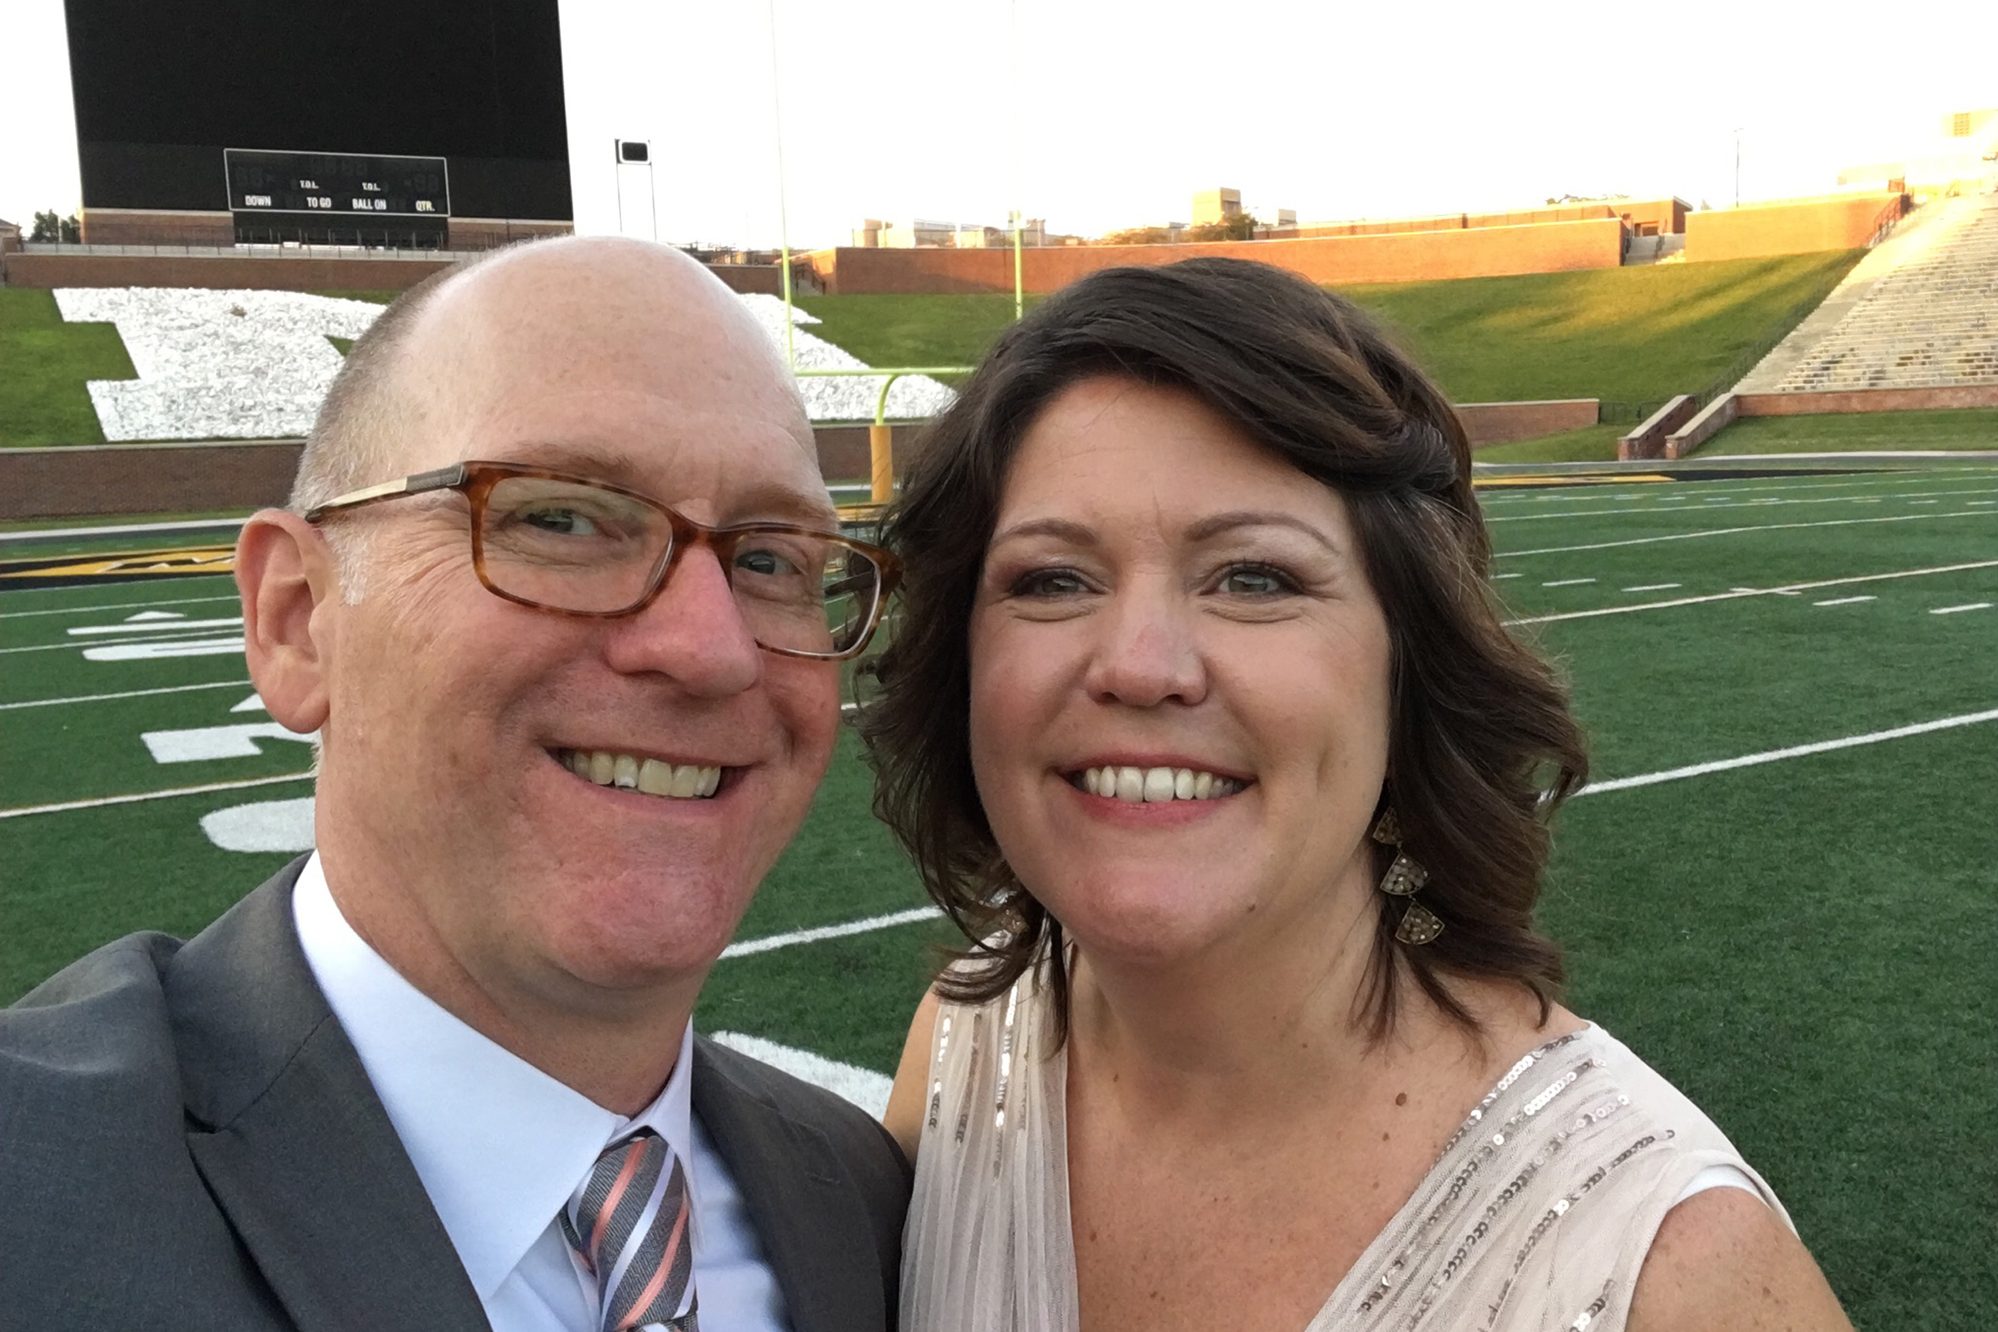 Megan and Stan Silvey pose for a photo after their wedding on faurot field